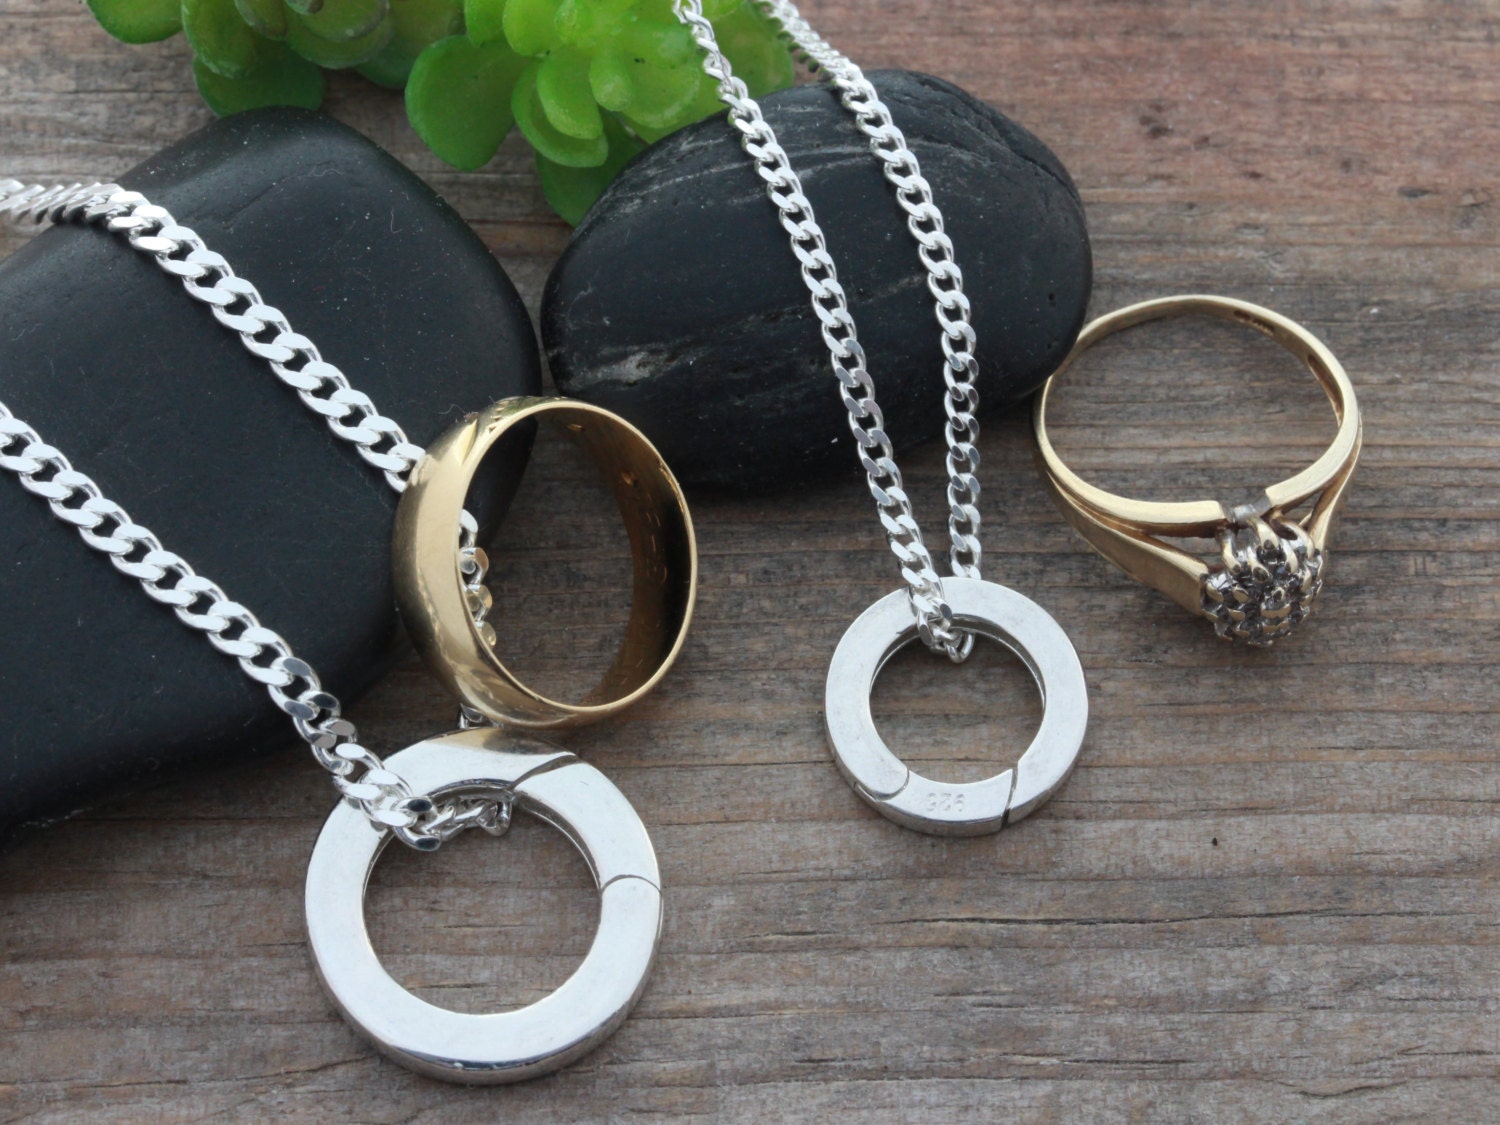 Pregnant wedding ring necklace